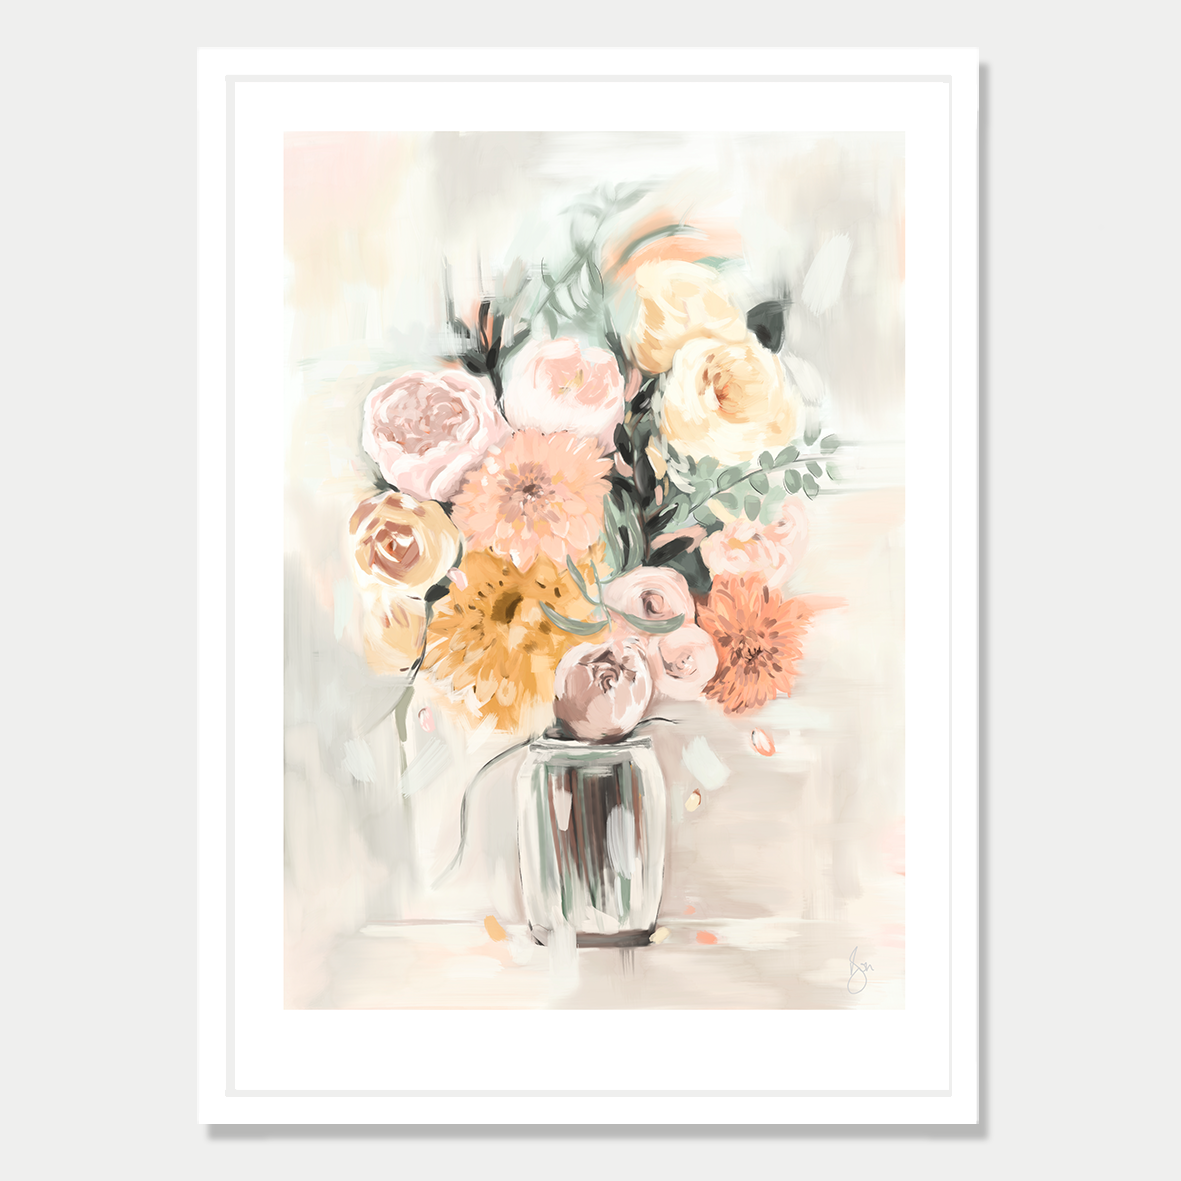 This art print is a still life of a bouquet of flowers in a glass vase, by Bon Jung. Printed in New Zealand by endemicworld and framed in white.